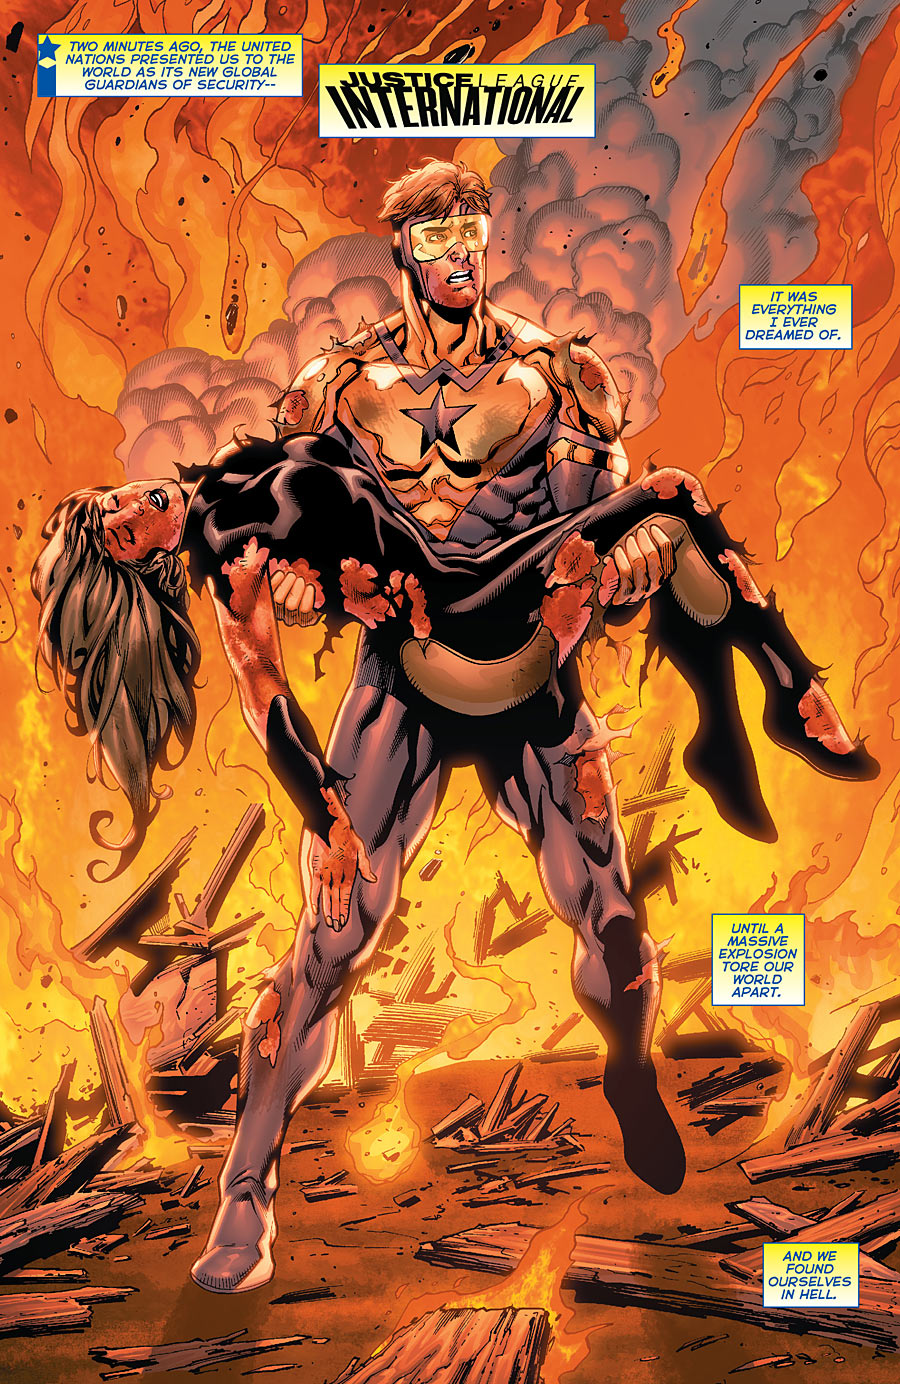 JLI #7 (2012) featuring Booster Gold and Fire full-page spread